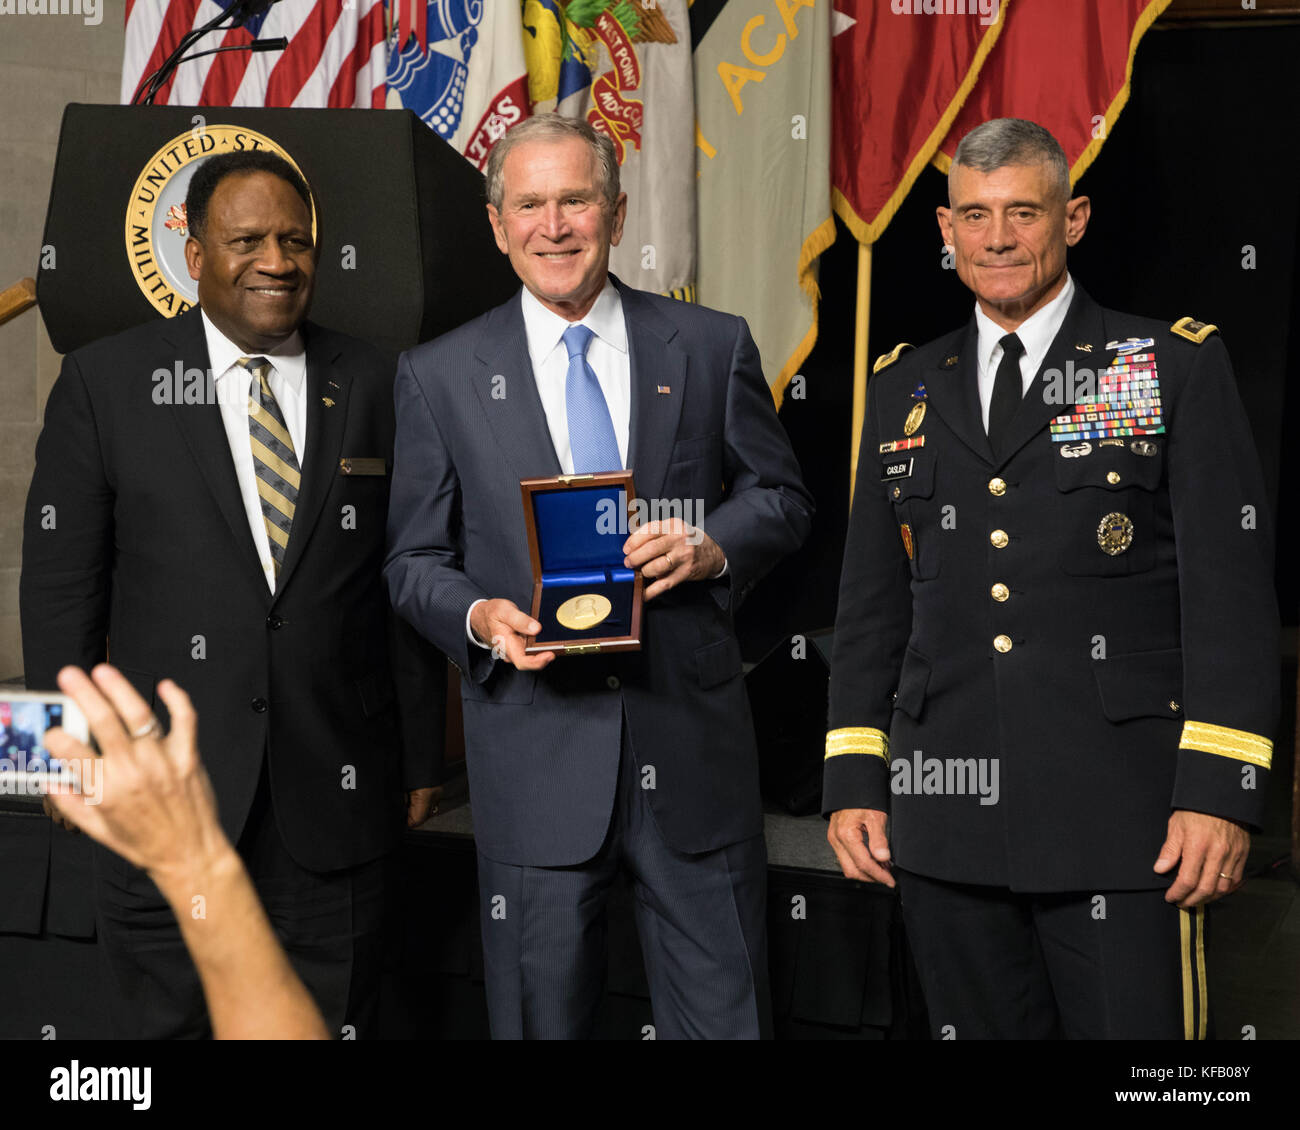 Former U.S. President George W. Bush (middle) receives the Sylvanus Thayer Award during a ceremony at the U.S. Military Academy at West Point October 19, 2017 in West Point, New York.   (photo by Michelle Eberhart via Planetpix) Stock Photo